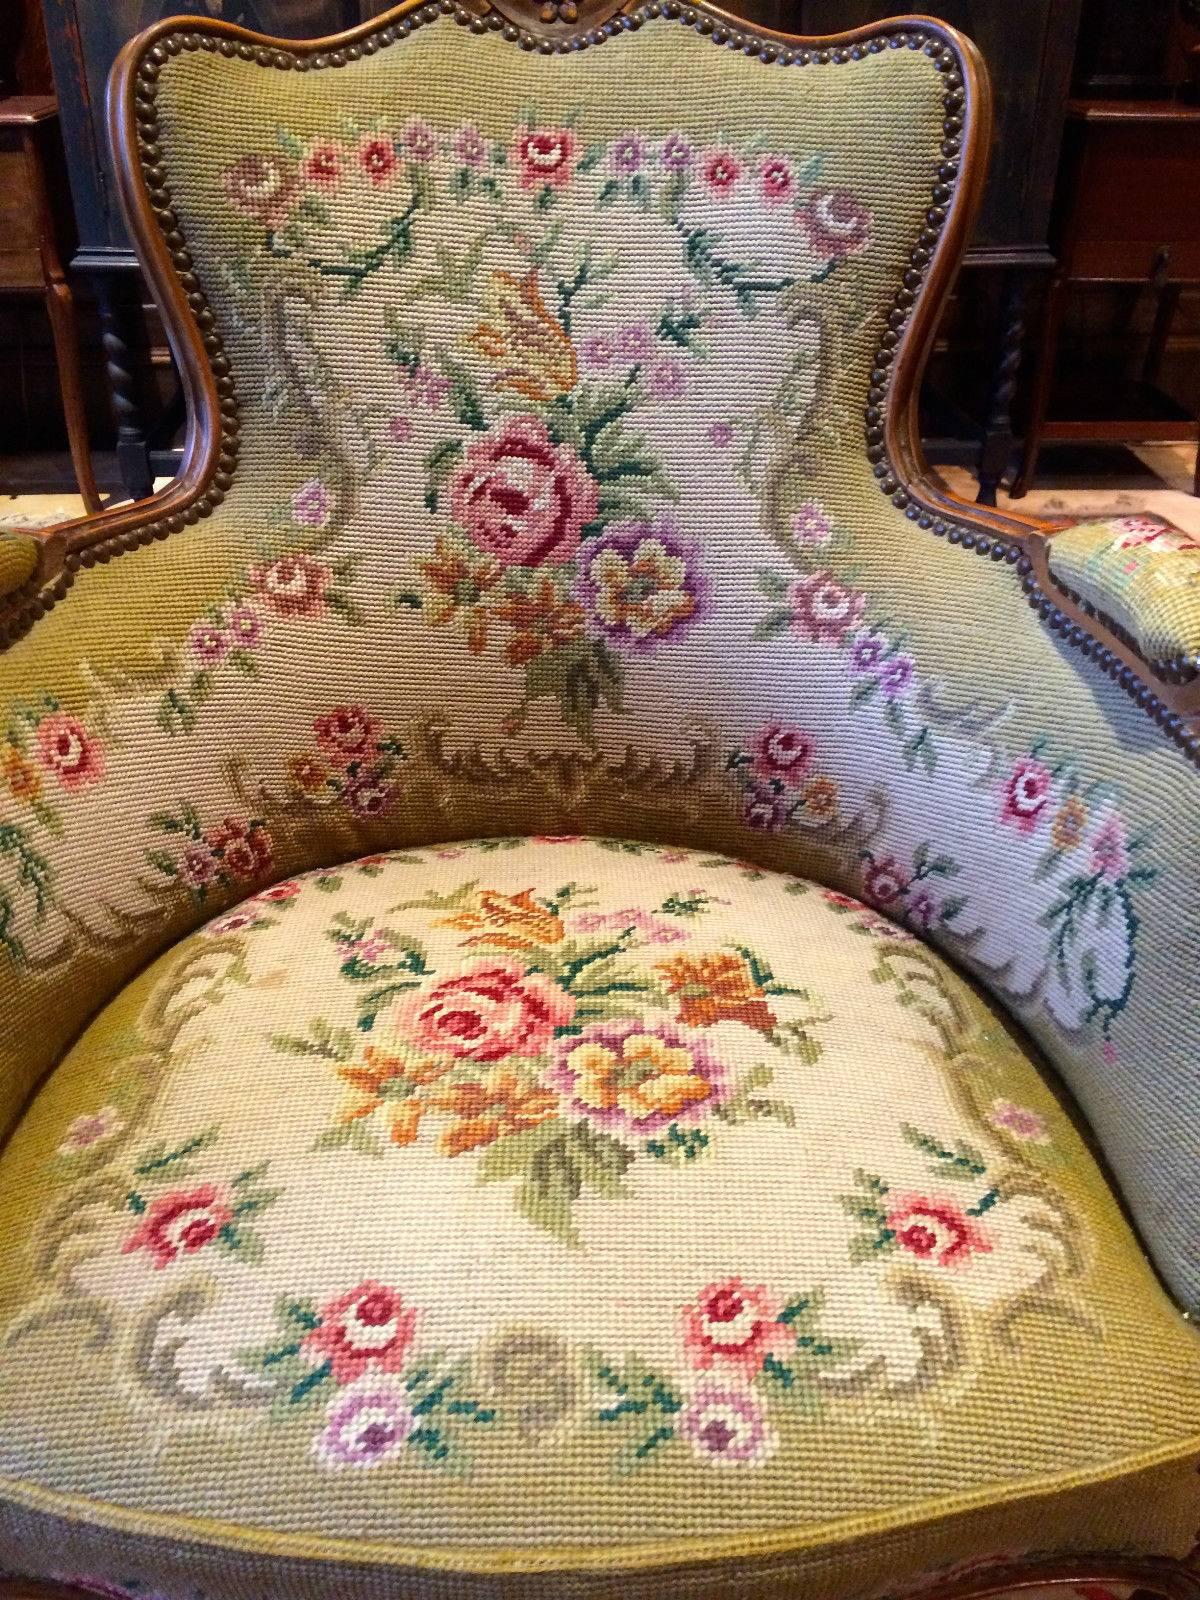 A beautiful antique French Mahogany salon armchair with stuff-over arms and seat with near matching footstool, upholstered in floral needlework ‘Roses’ with gold velvet back, scrolled arms, standing on elegant cabriole legs, the armchair is offered